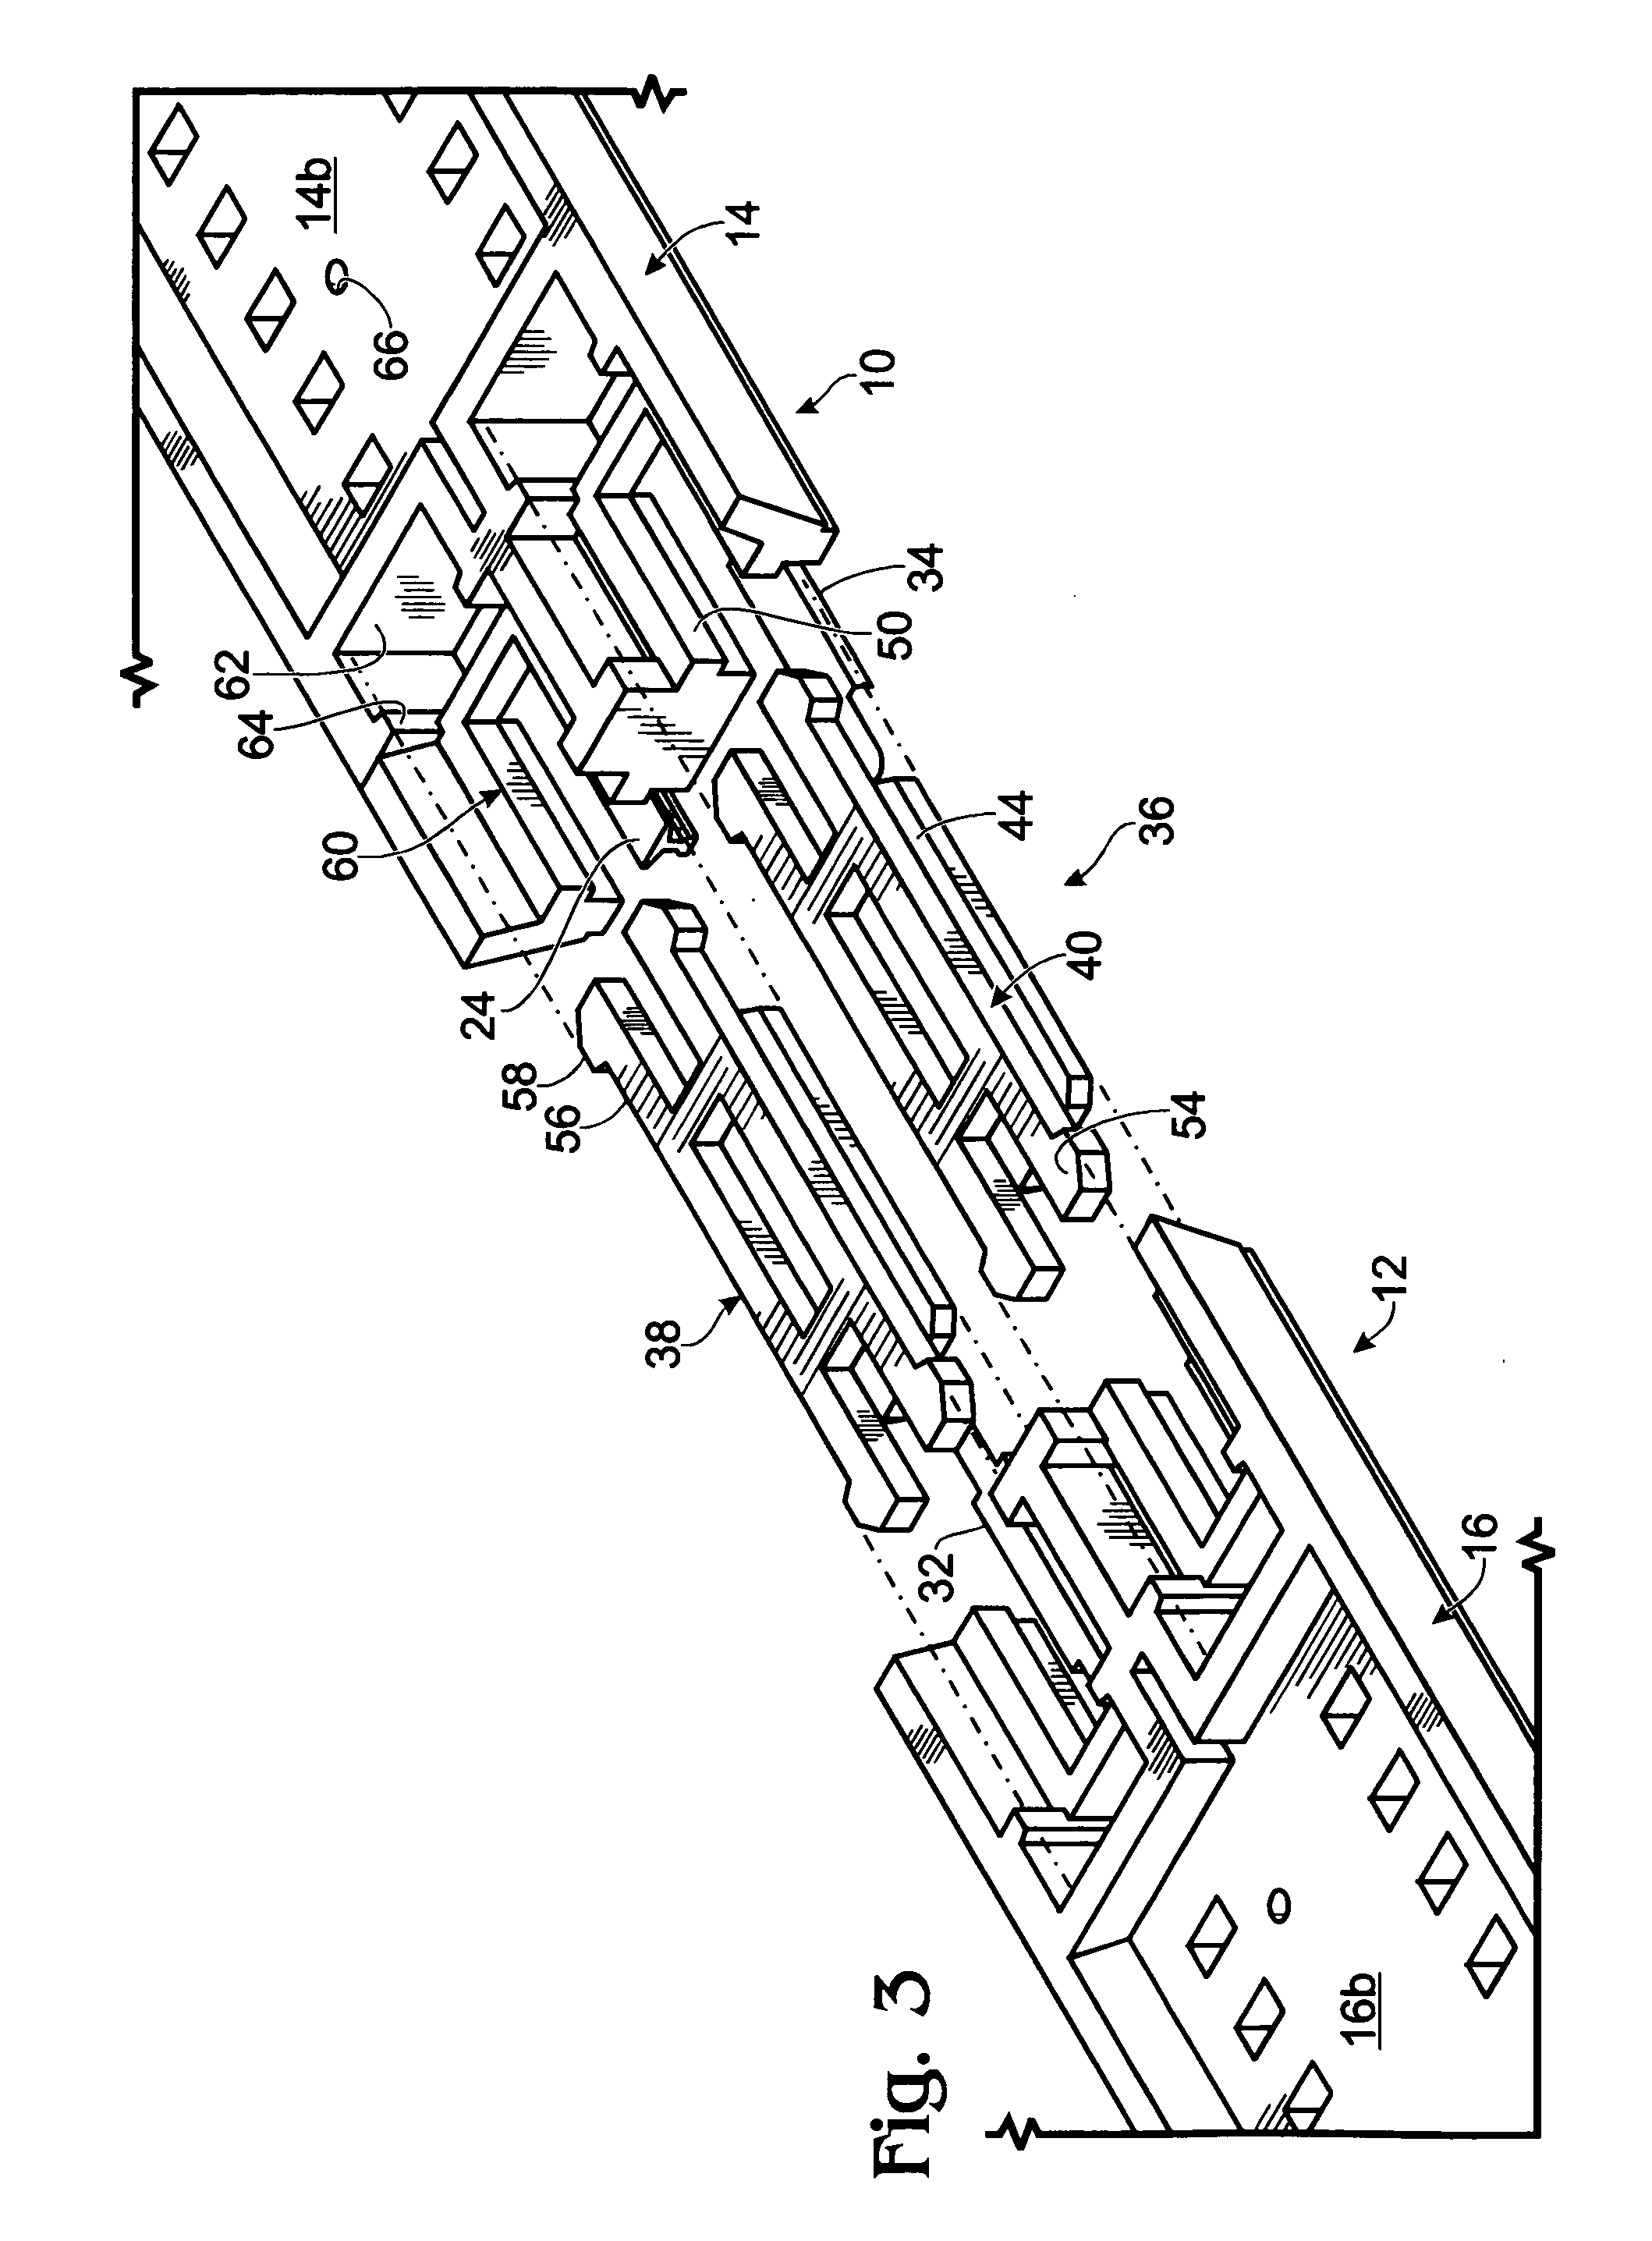 Combined track-railbed joining apparatus